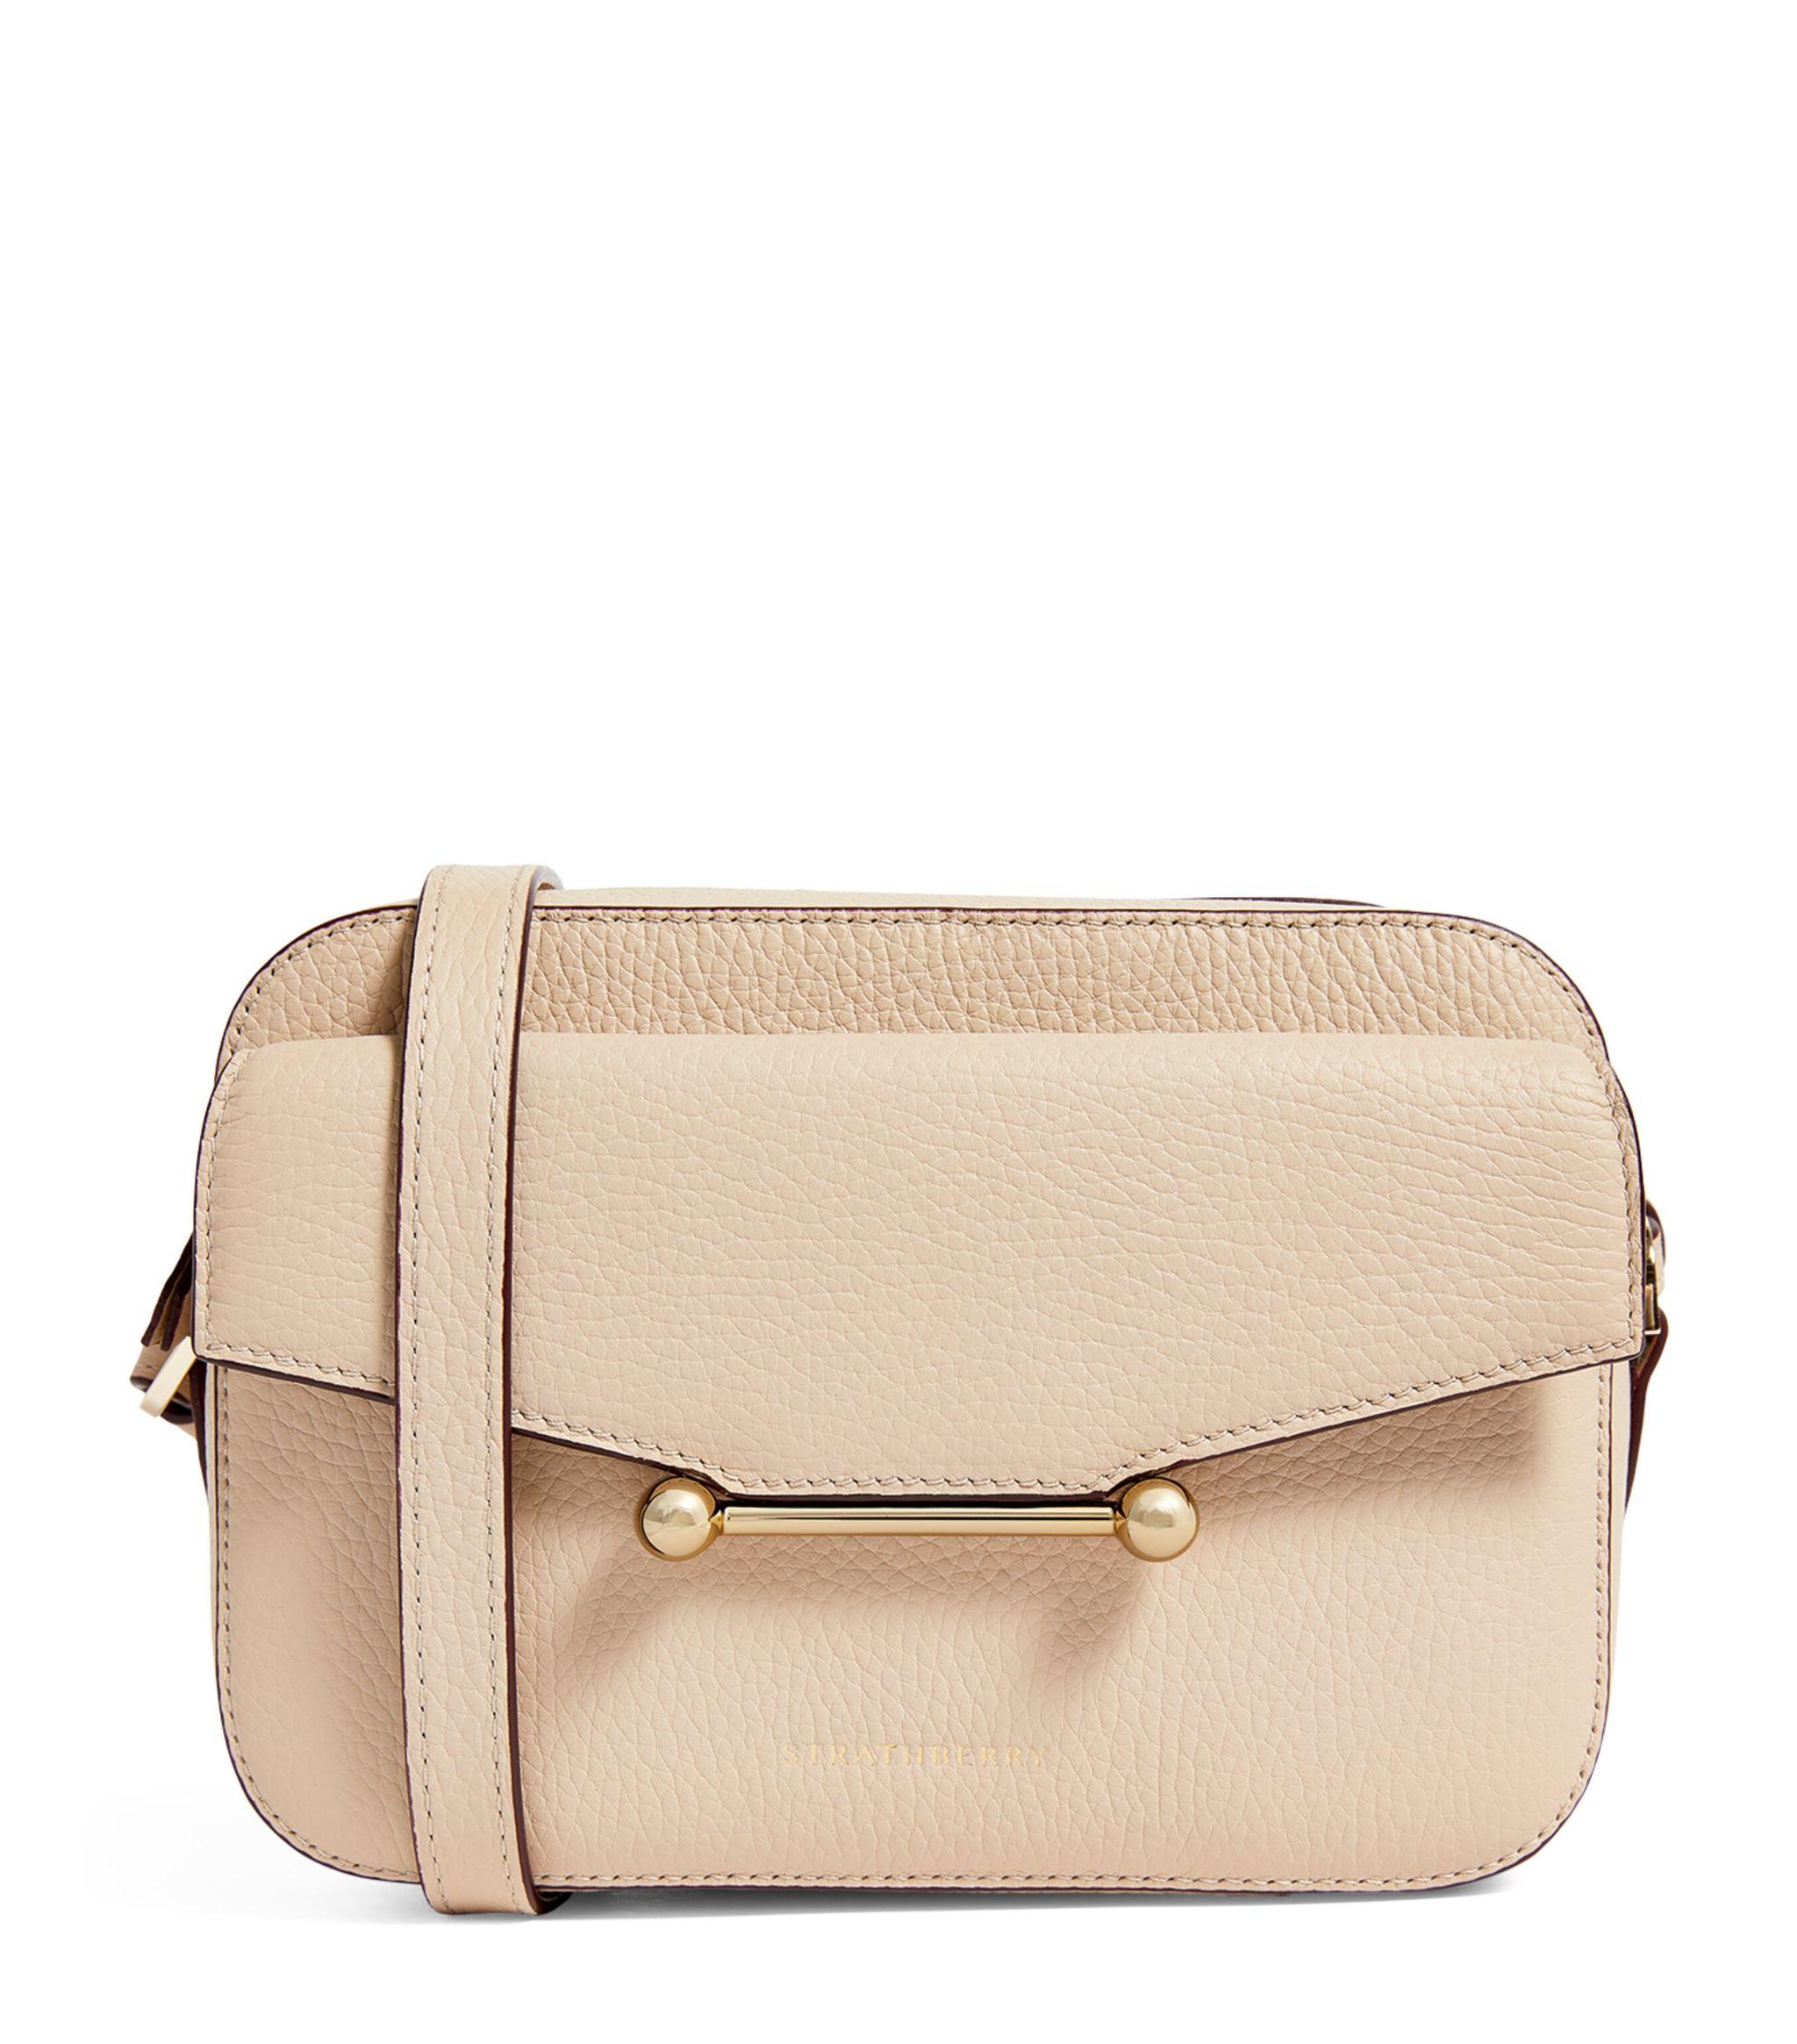 Strathberry Leather Mosaic Cross-body Bag in Natural | Lyst